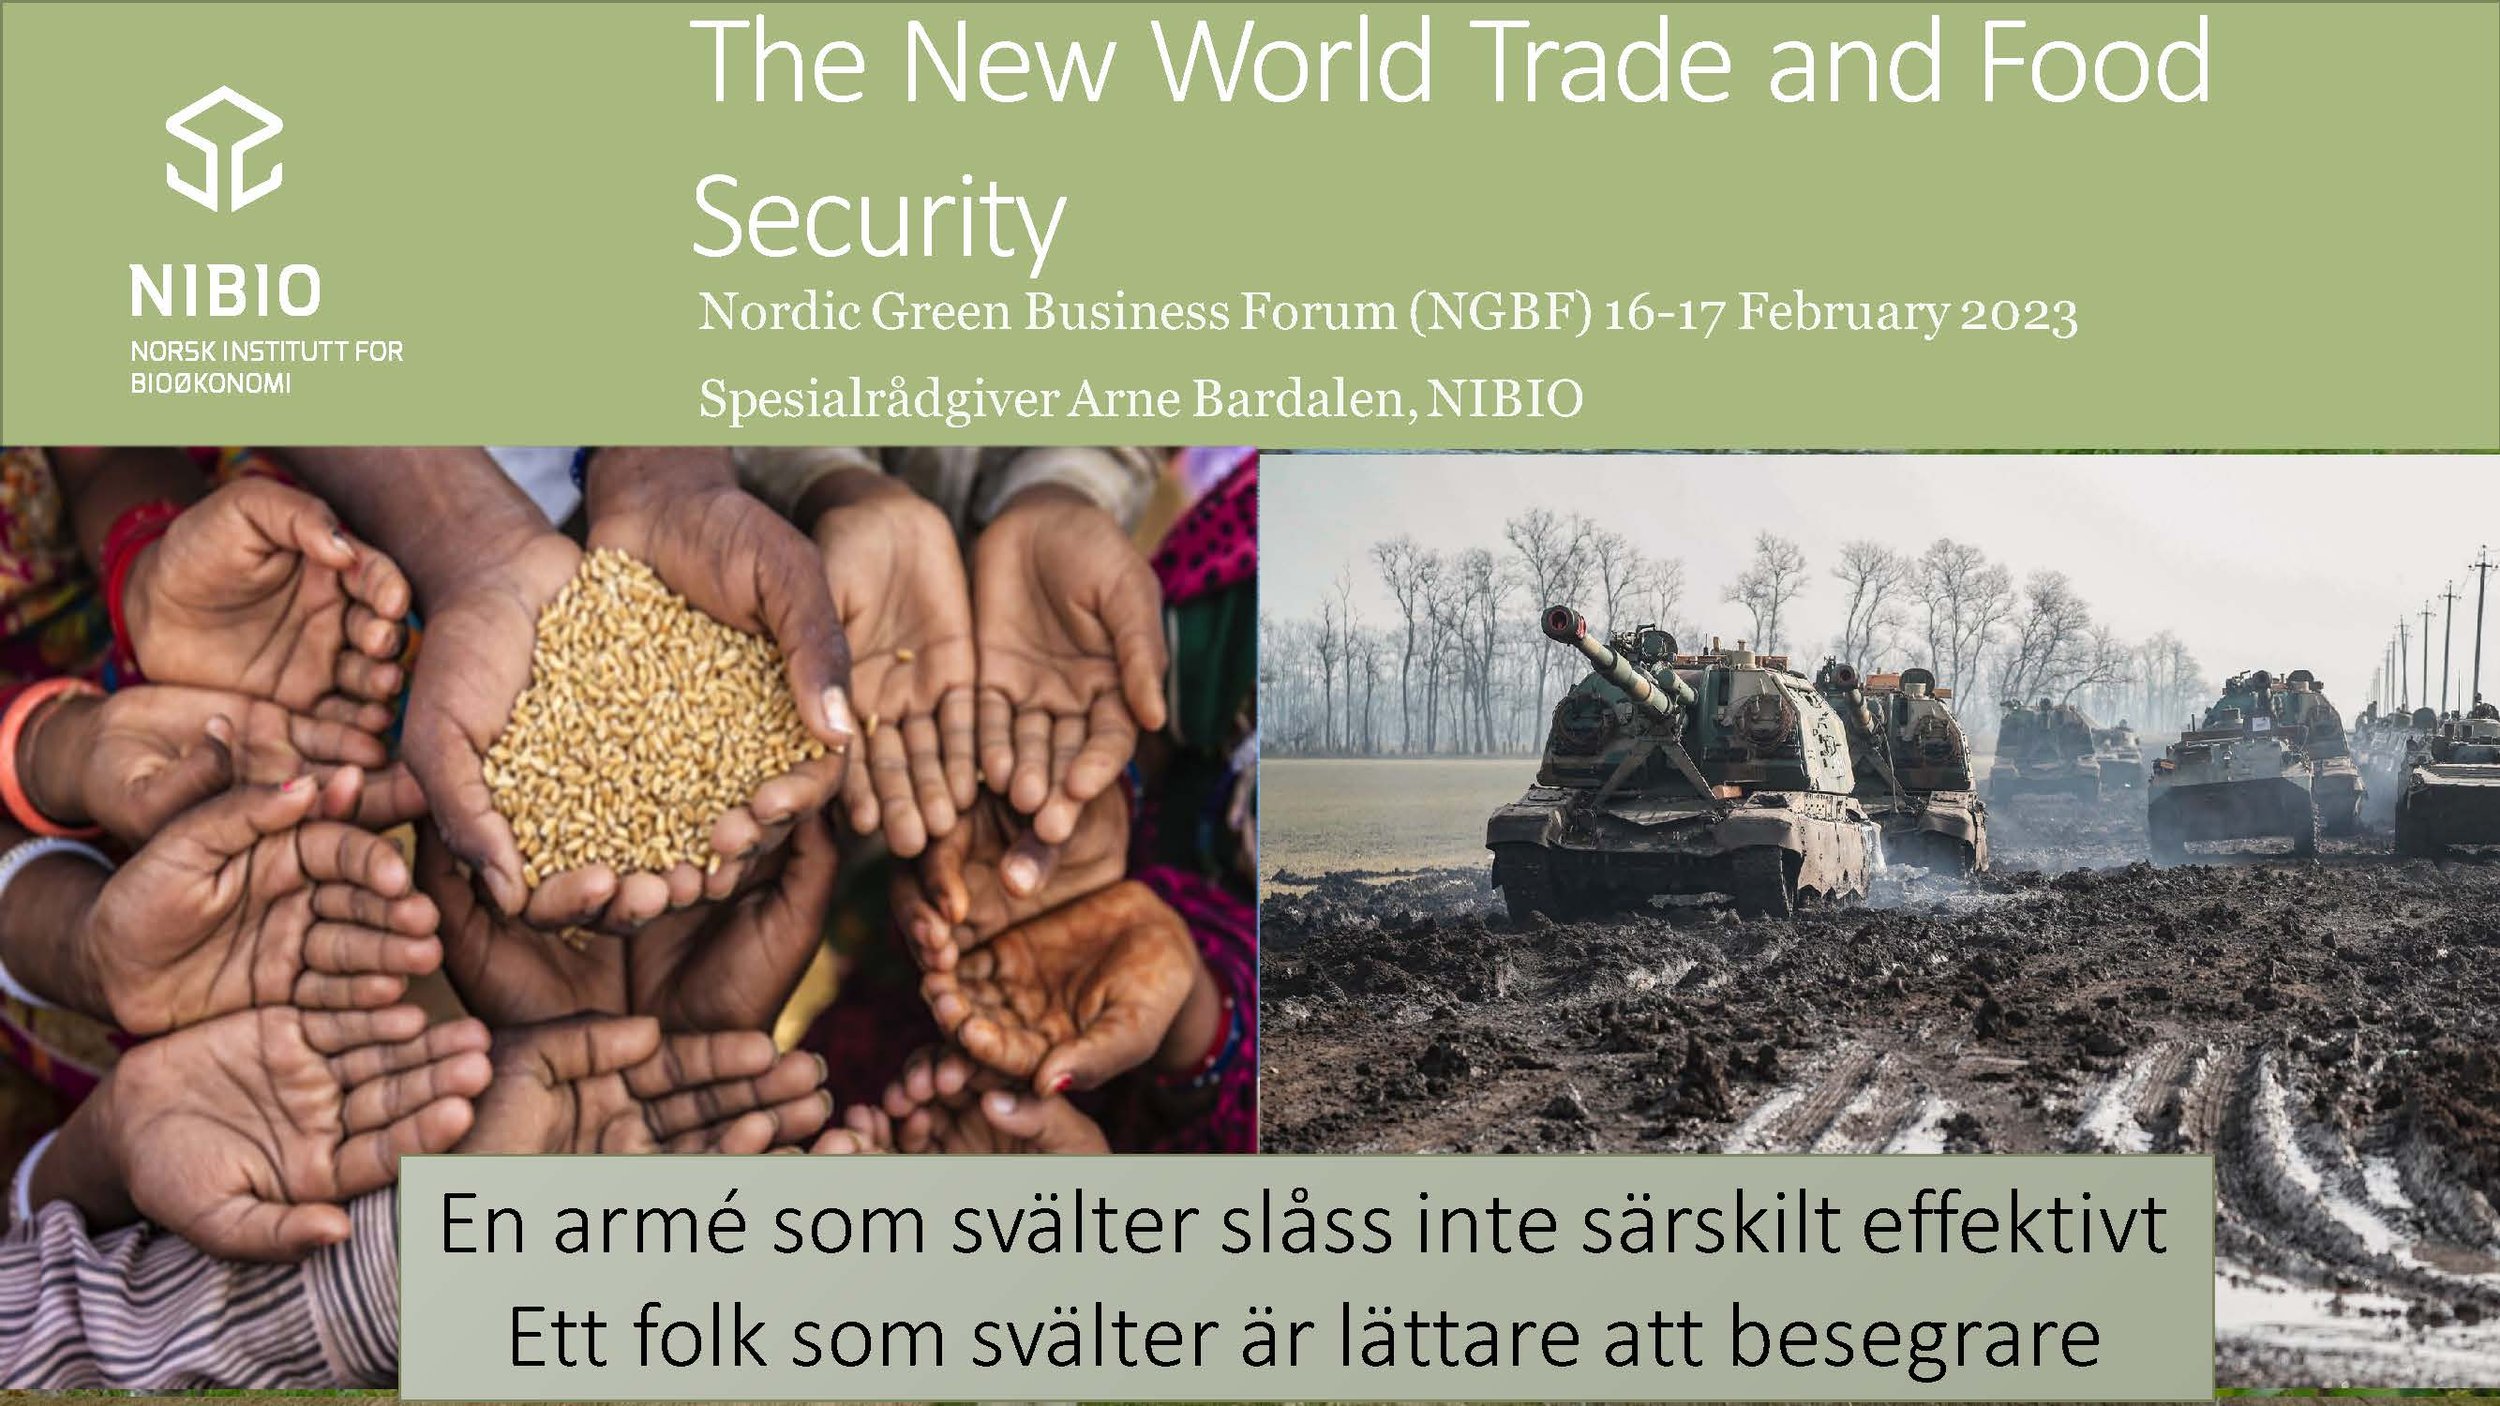 The New World Trade and Food Security, Spesialrådgiver Arne Bardalen, NIBIO_Page_1.jpg